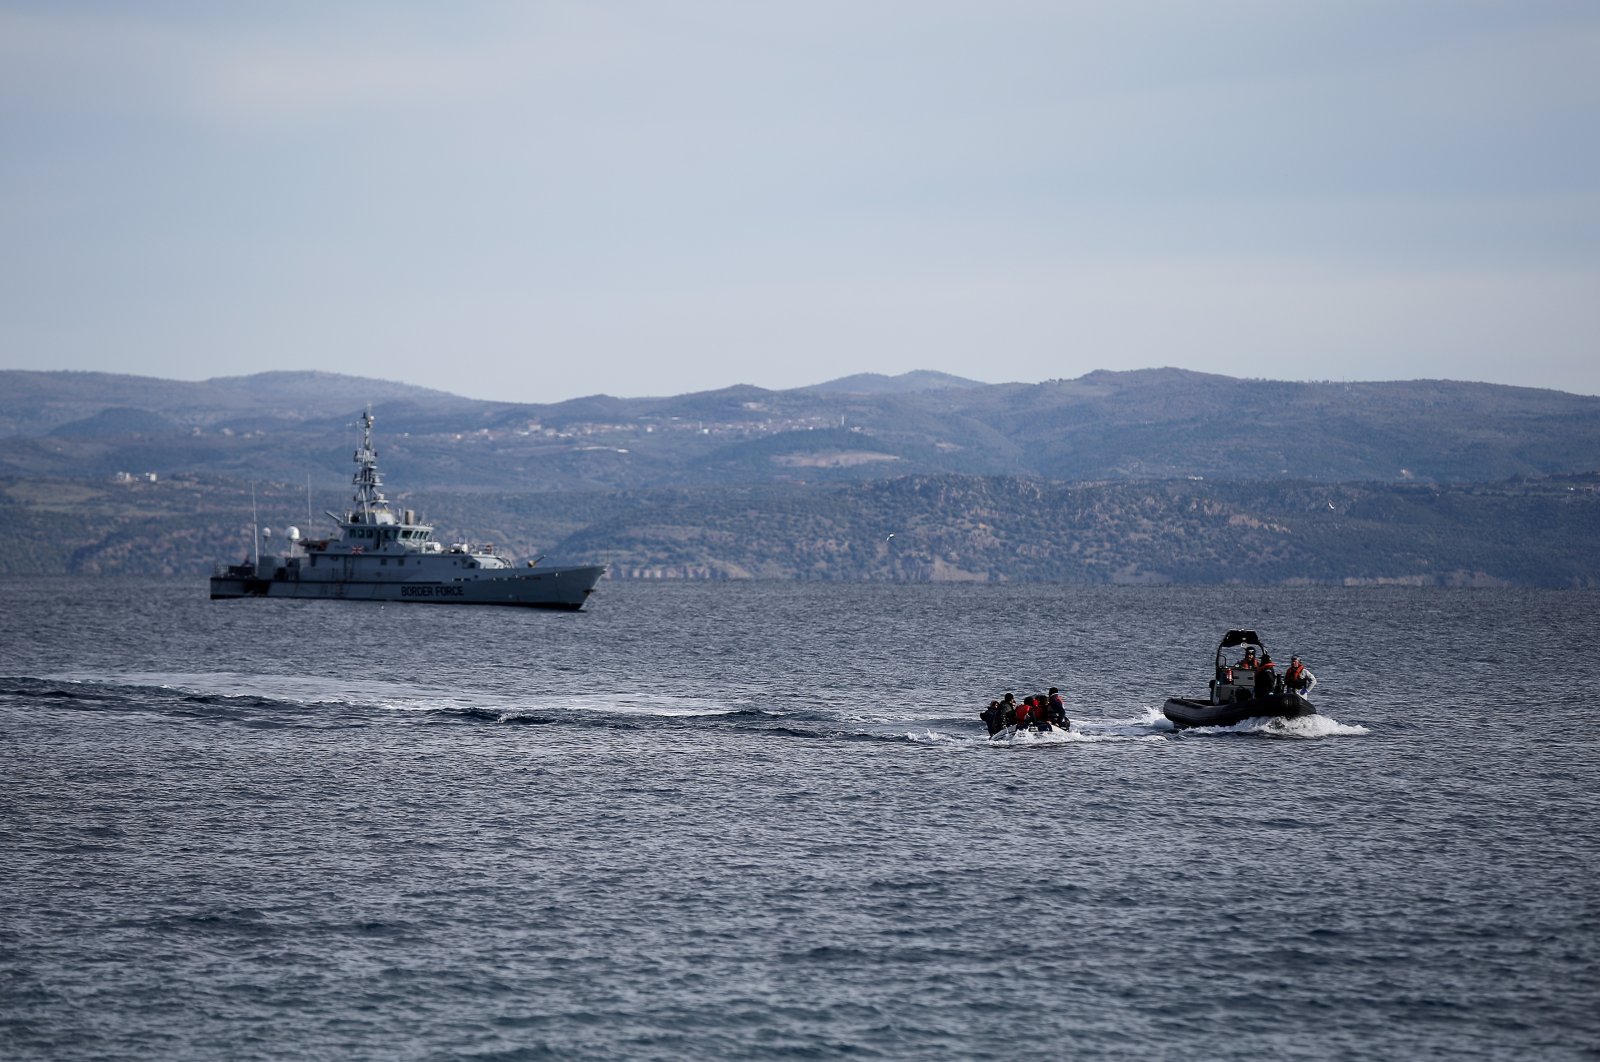 A rescue boat escorts a dinghy with migrants from Afghanistan as a Frontex vessel patrol in the background, on the island of Lesbos, Greece, Feb. 28, 2020. (Reuters File Photo)